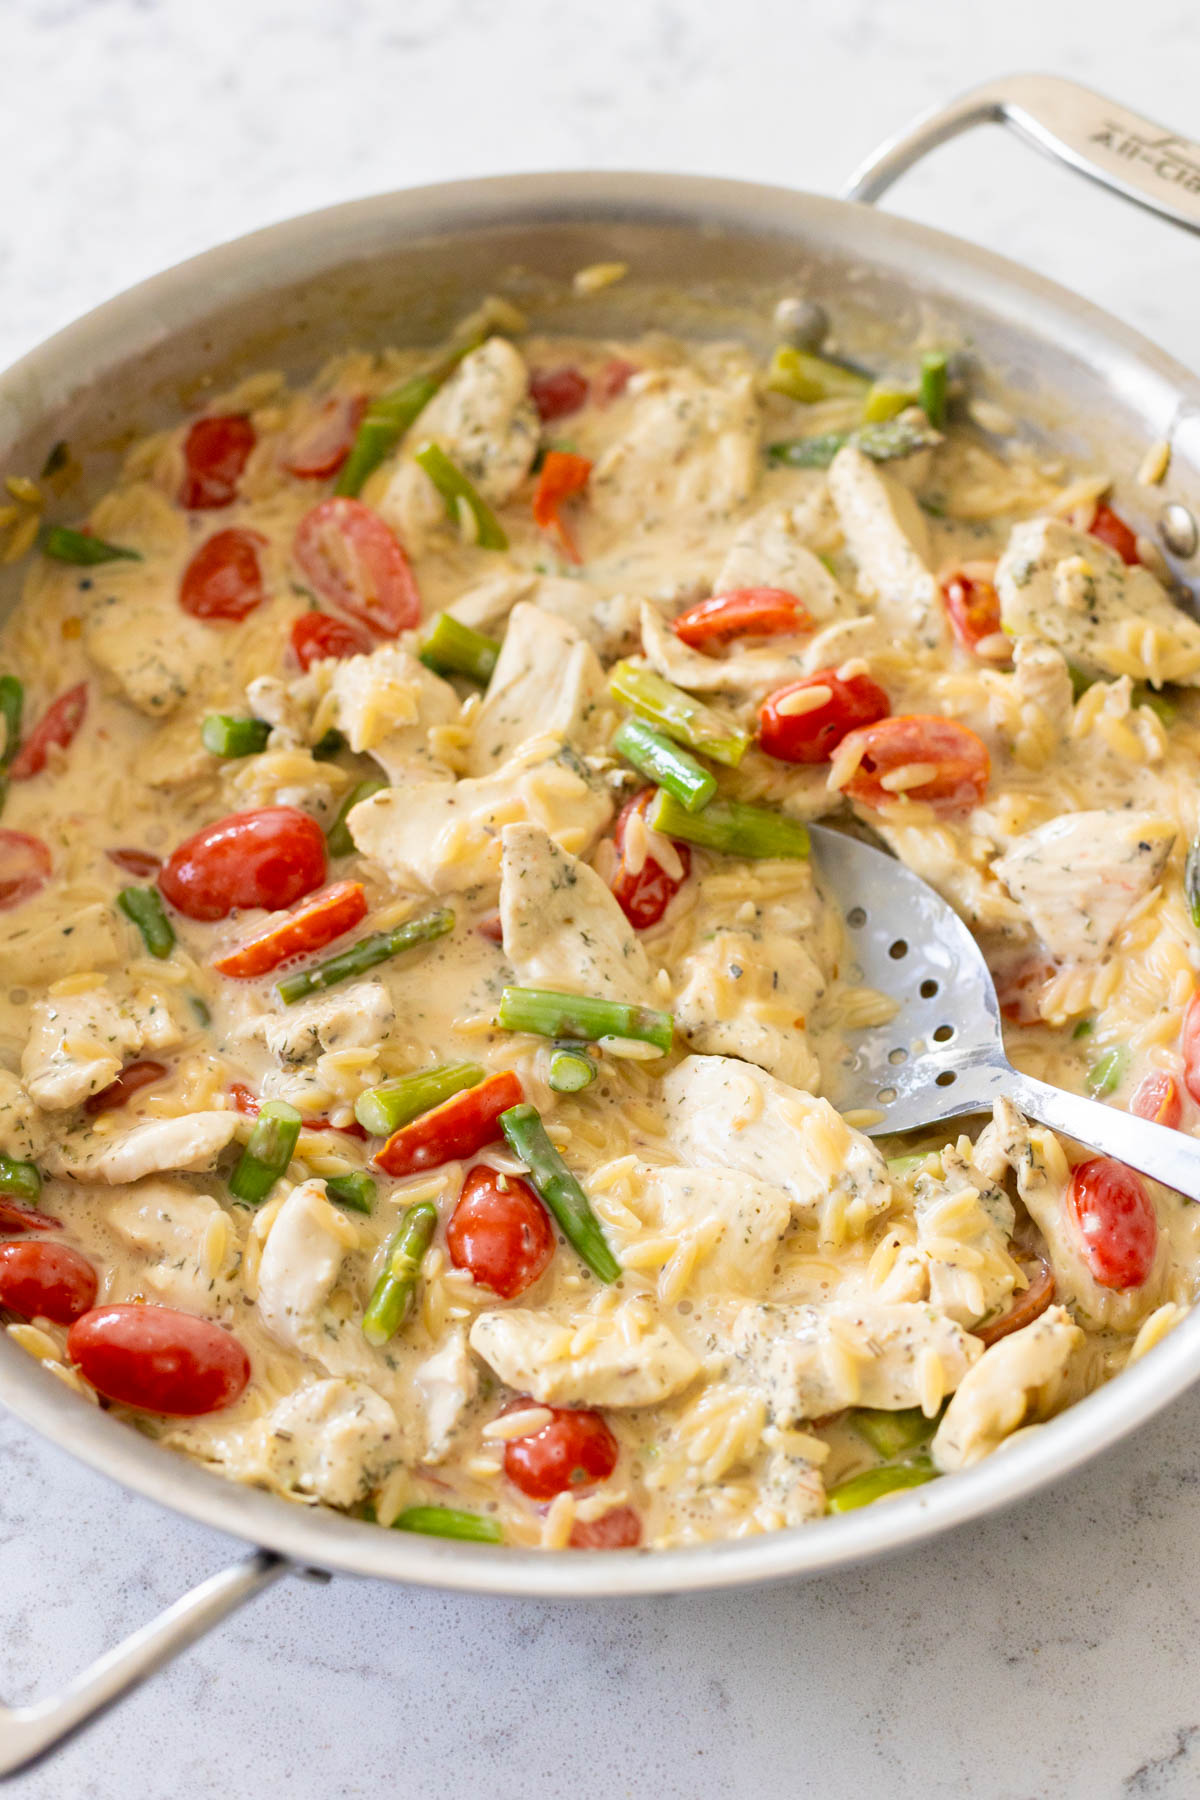 The skillet is filled with orzo, chunks of chicken, asparagus and cherry tomatoes, all in a rich and creamy sauce.